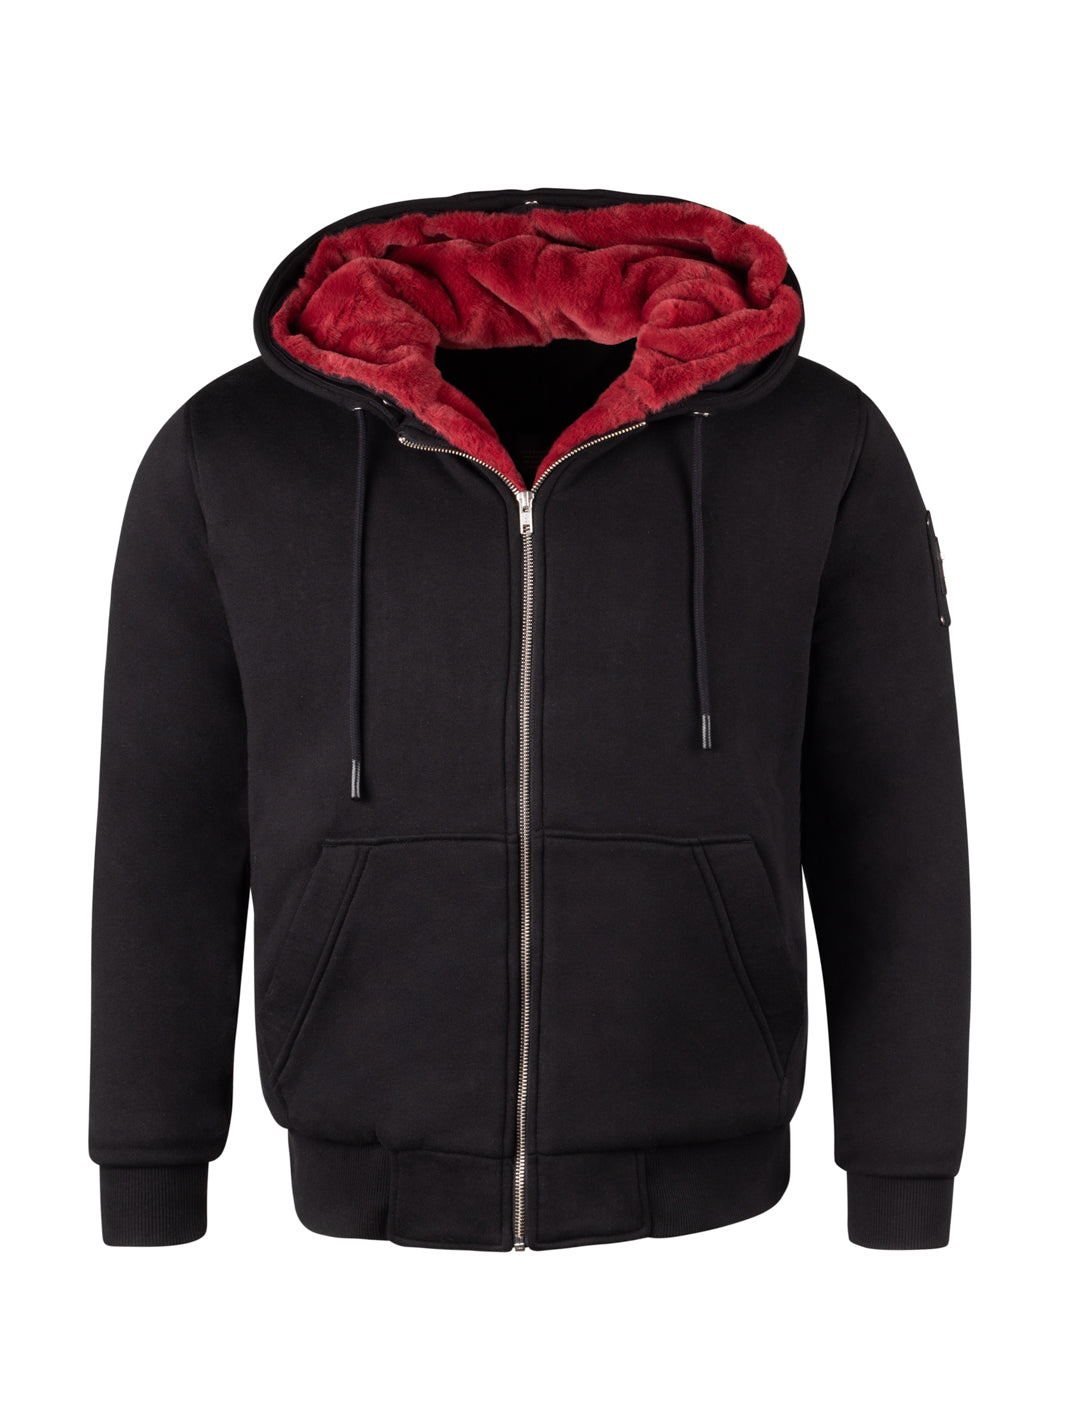 Black Hoodie with Red Removable Fur